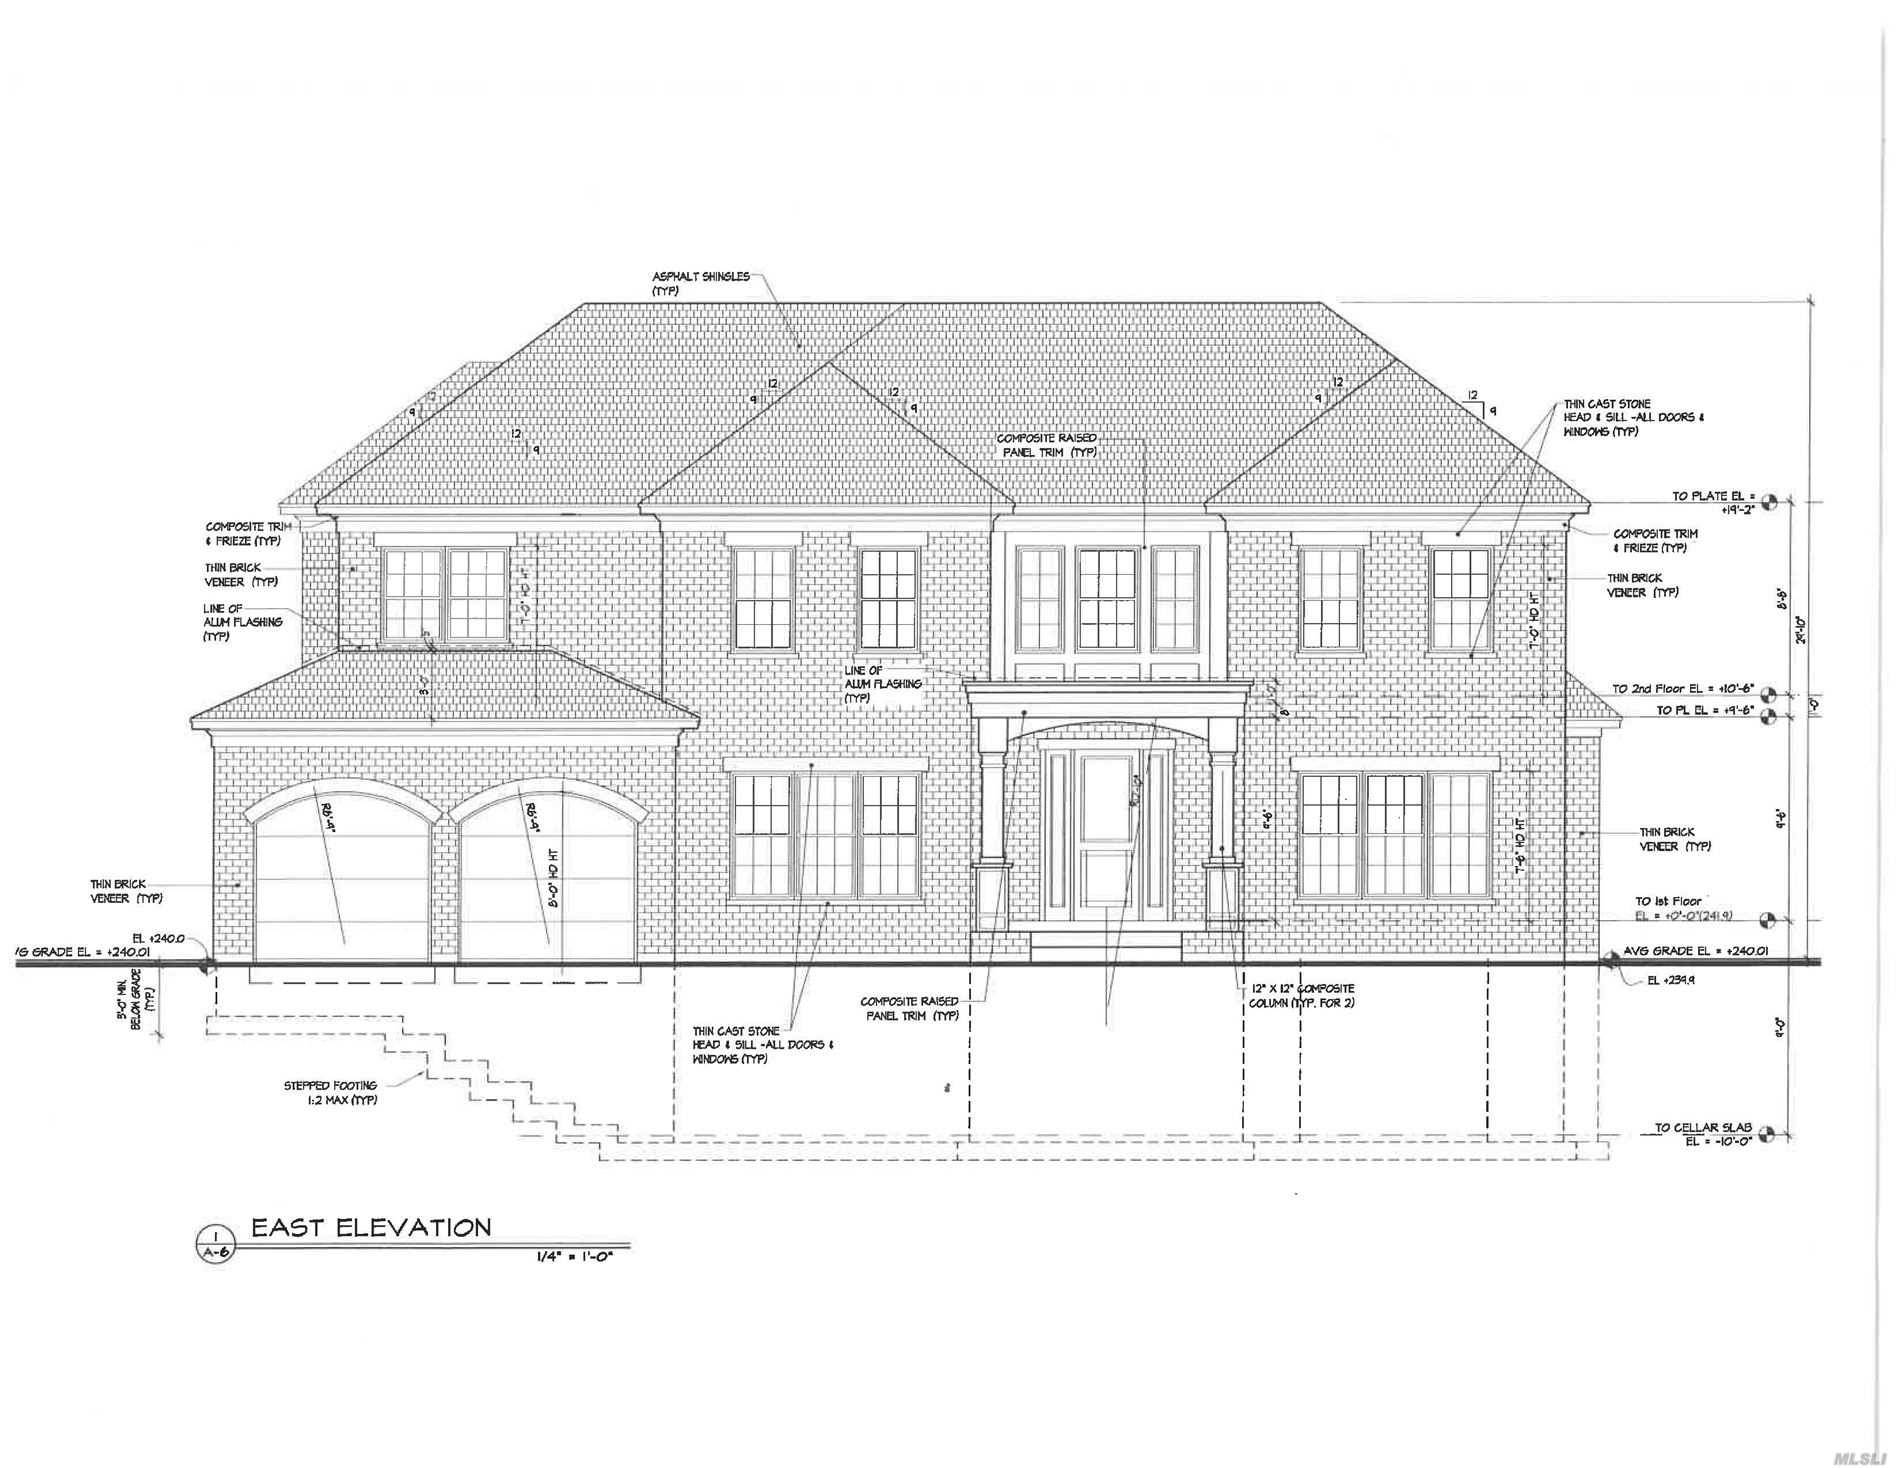 UNIQUE OPPORTUNITY TO WORK WITH BUILDER TO DESIGN AND CUSTOM BUILD 5 6 BEDROOM HOME N STRATHMORE VILLAGE OFFERING 4610 SQ FT OF LUXURY PLUS FINISHED LOWER LEVEL.